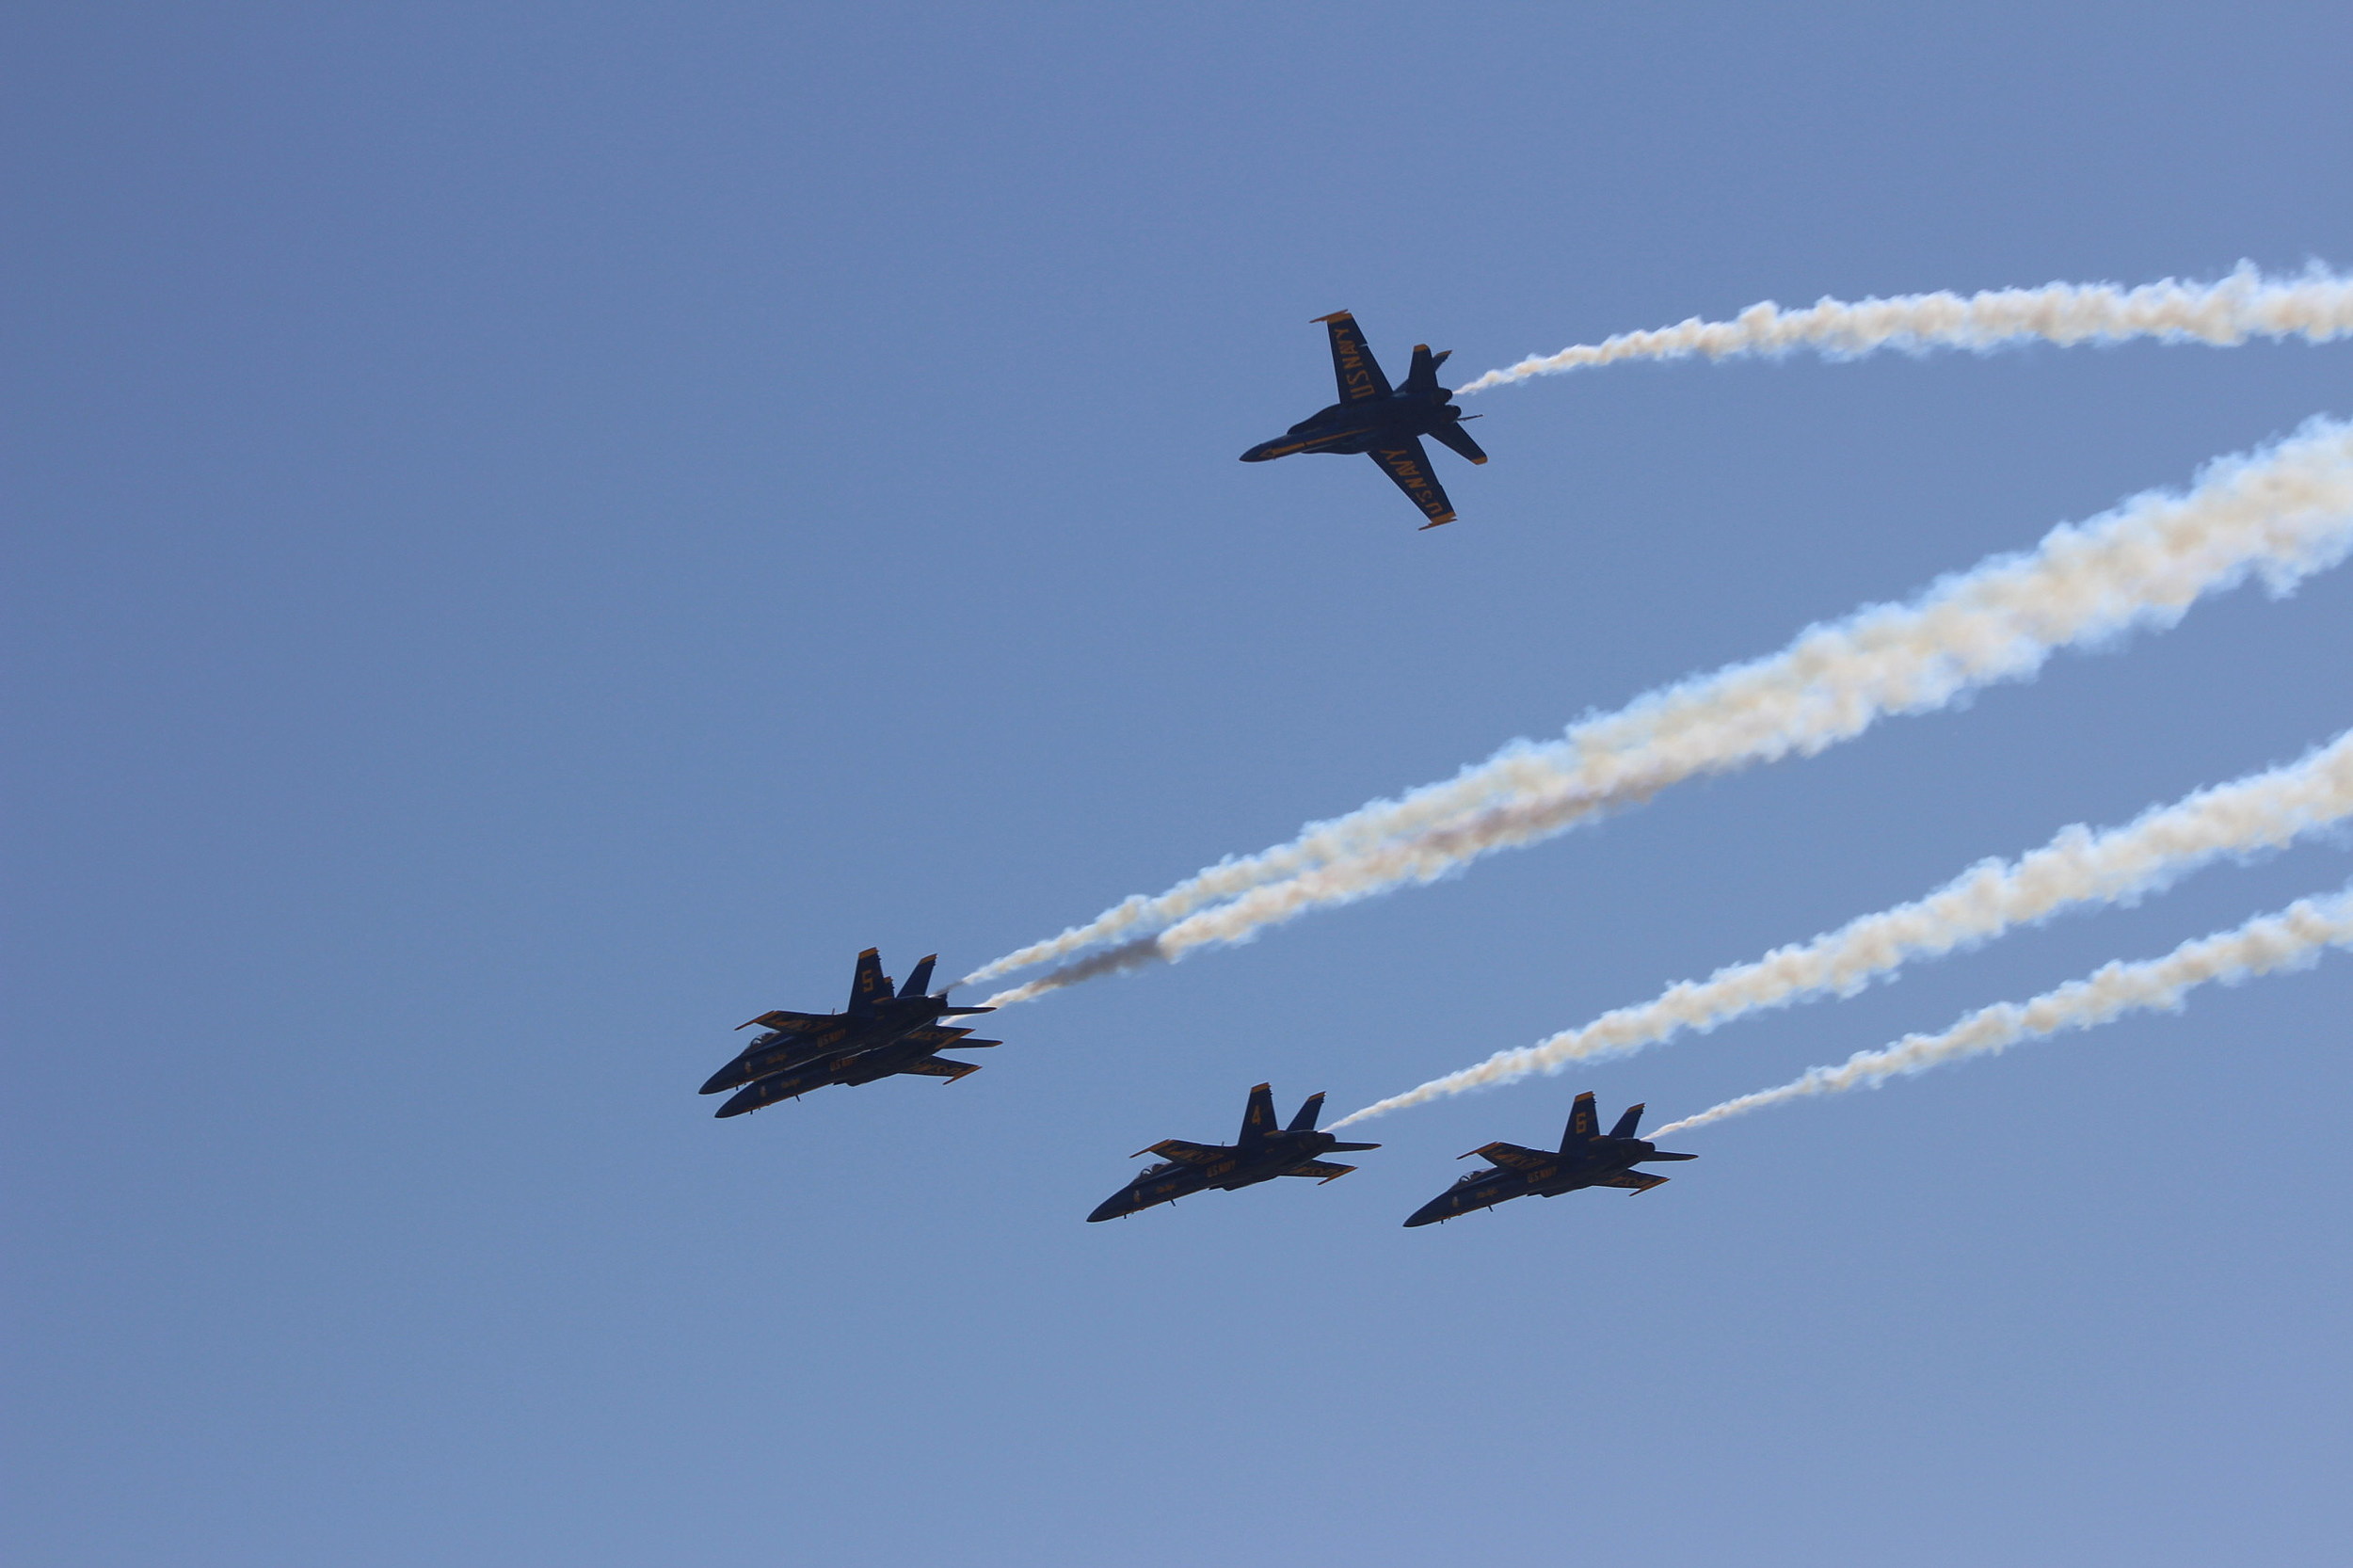 How Will The Weather Impact The Air Show This Weekend?